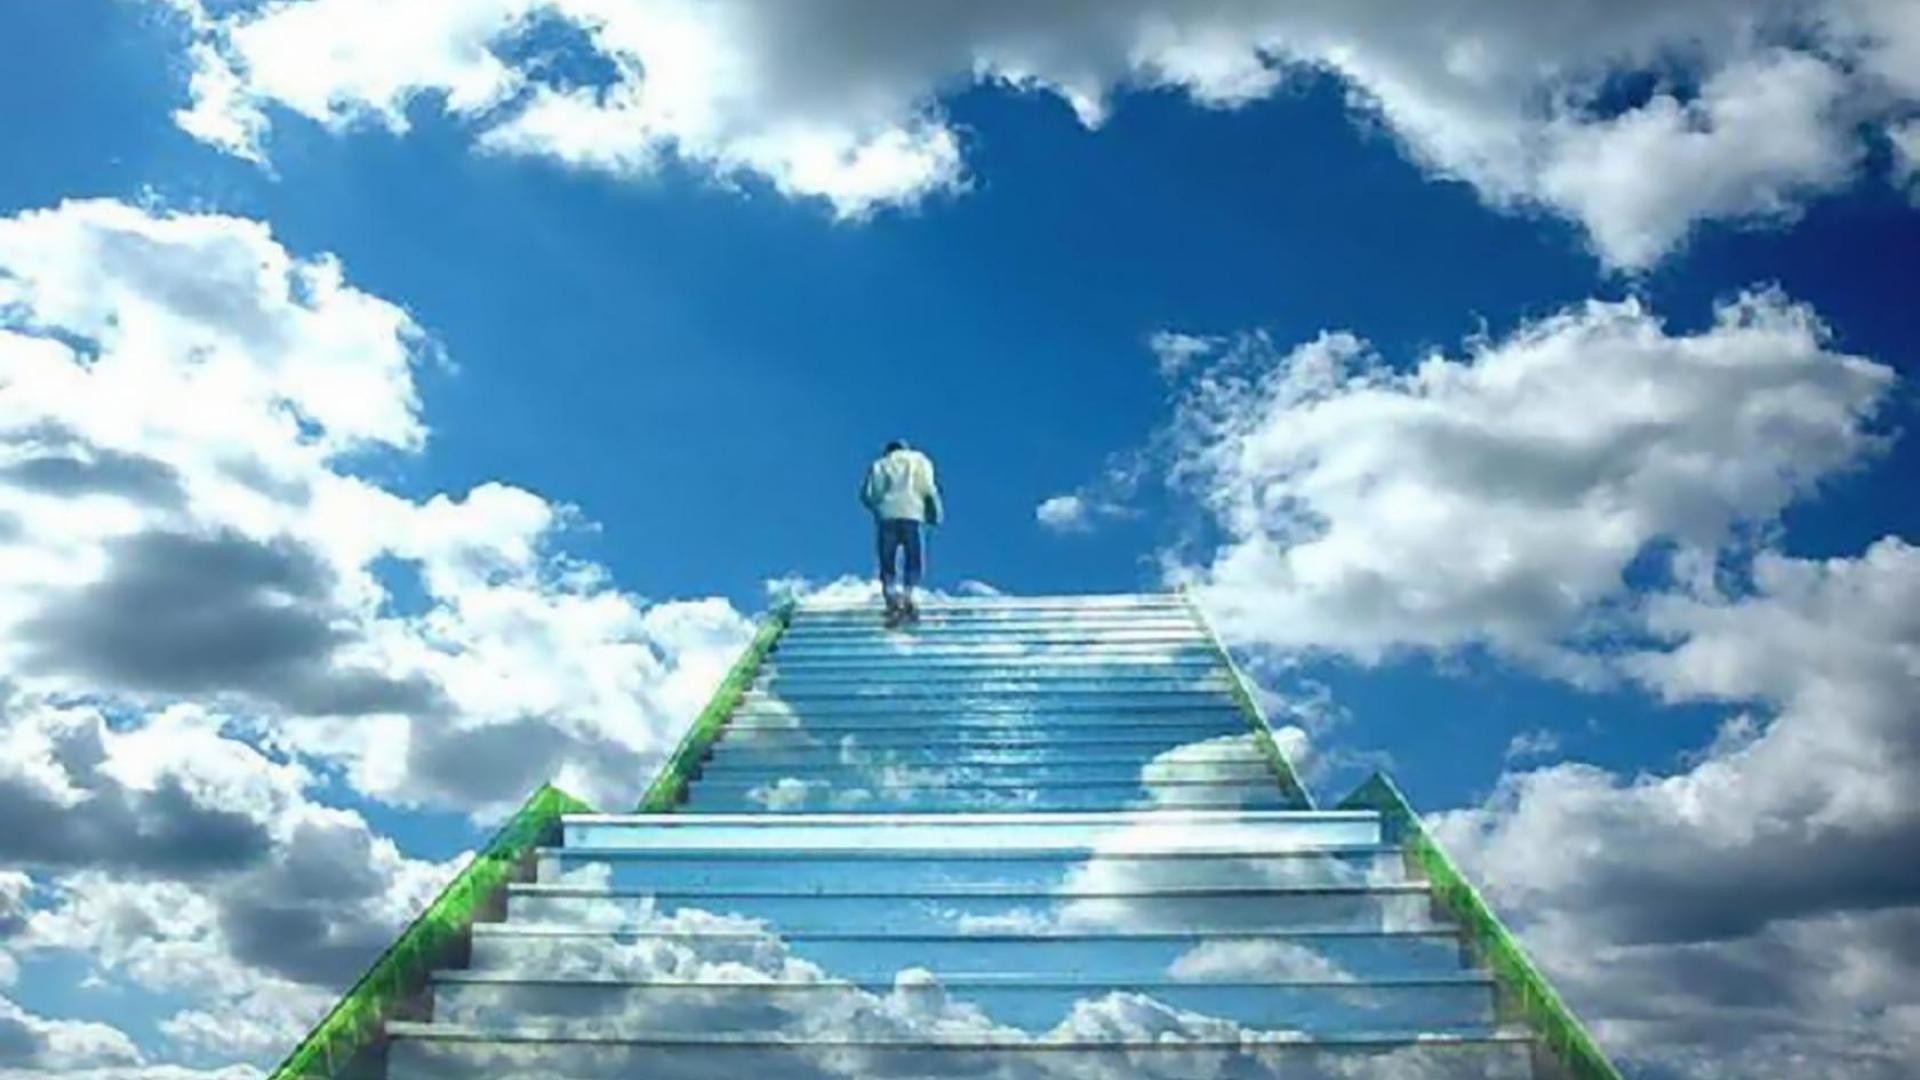 1920x1080 Stairway to heaven 166308 High Quality and Resolution 